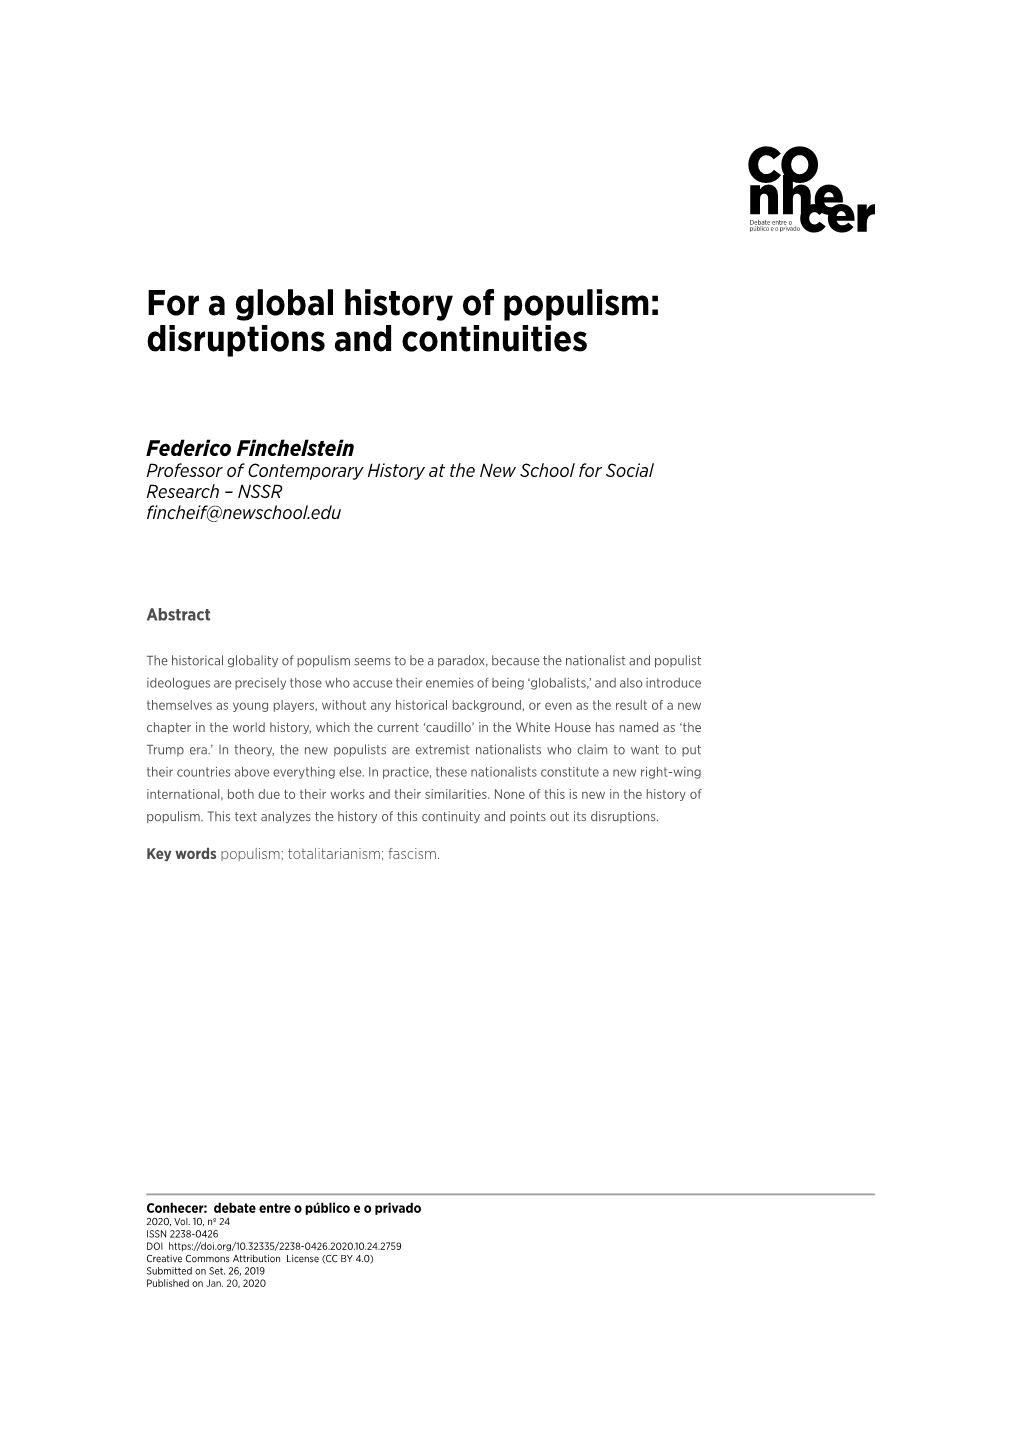 For a Global History of Populism: Disruptions and Continuities